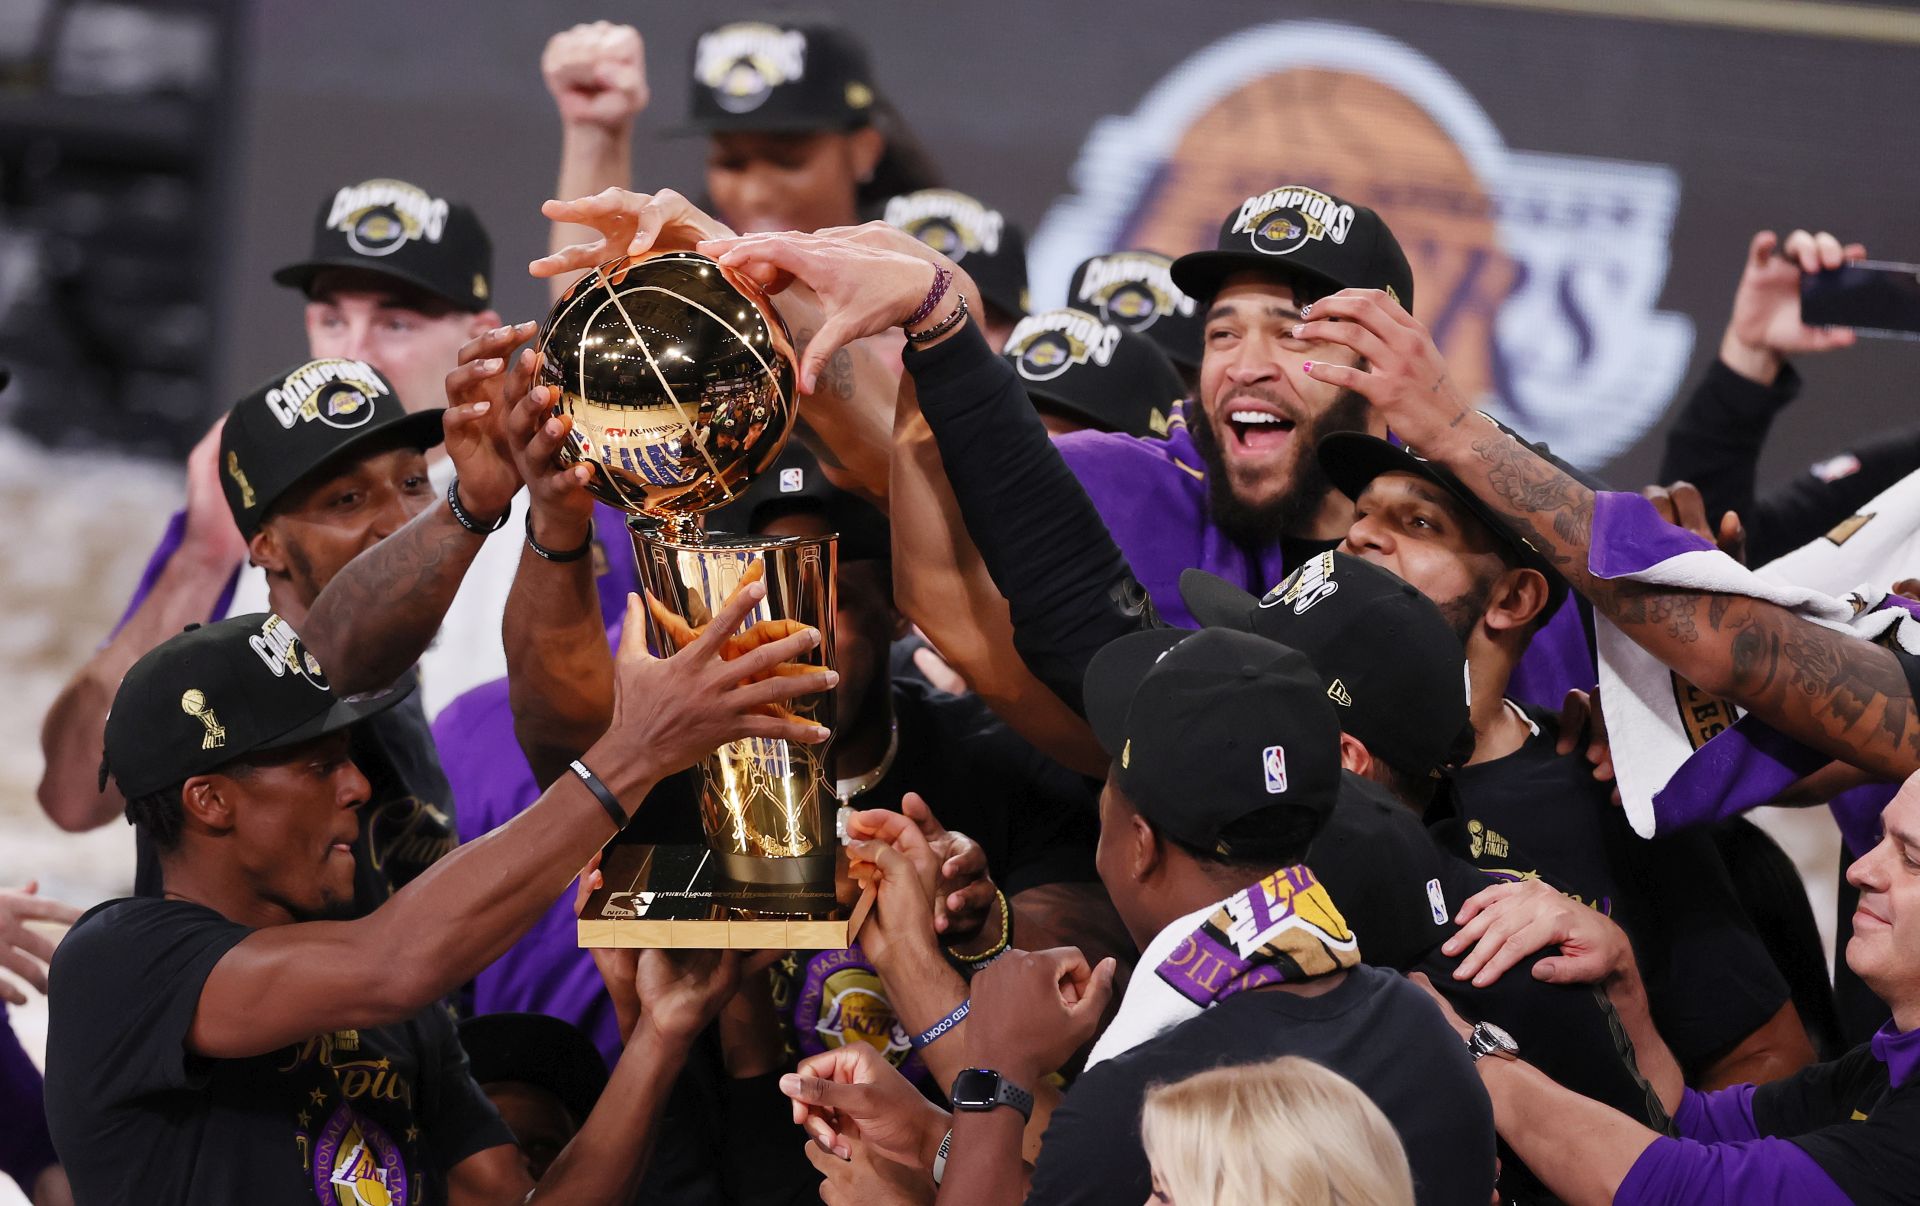 epaselect epa08736873 Los Angeles Lakers players celebrate with the Larry O'Brien trophy after defeating the Miami Heat to win the 2020 NBA Finals at the ESPN Wide World of Sports Complex in Kissimmee, Florida, USA, 11 October 2020.  EPA/ERIK S. LESSER SHUTTERSTOCK OUT